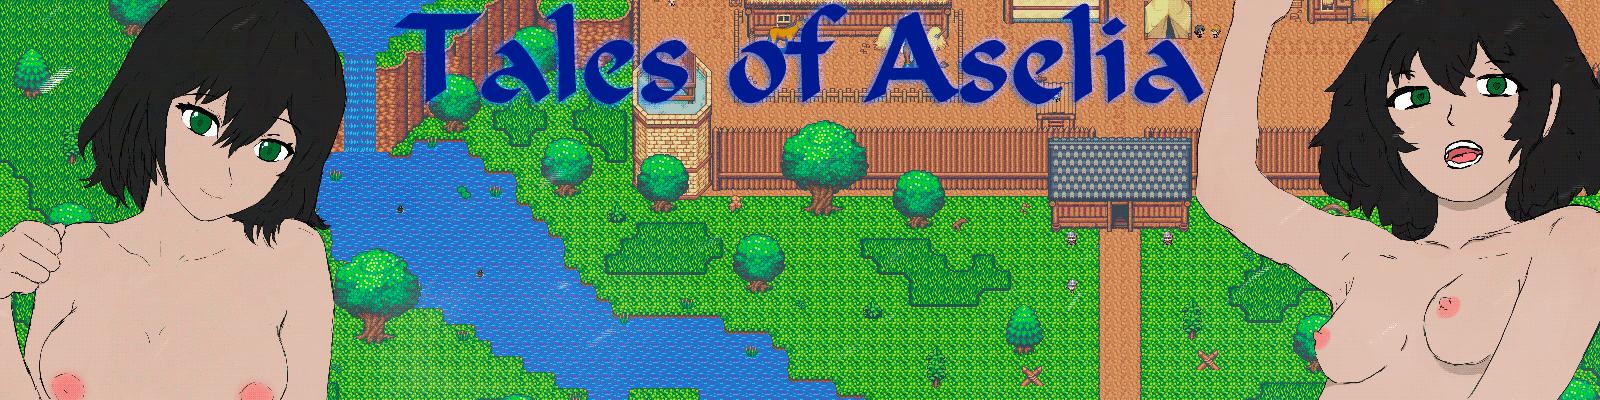 Tales of Aselia v0.0575 by masqetch Porn Game